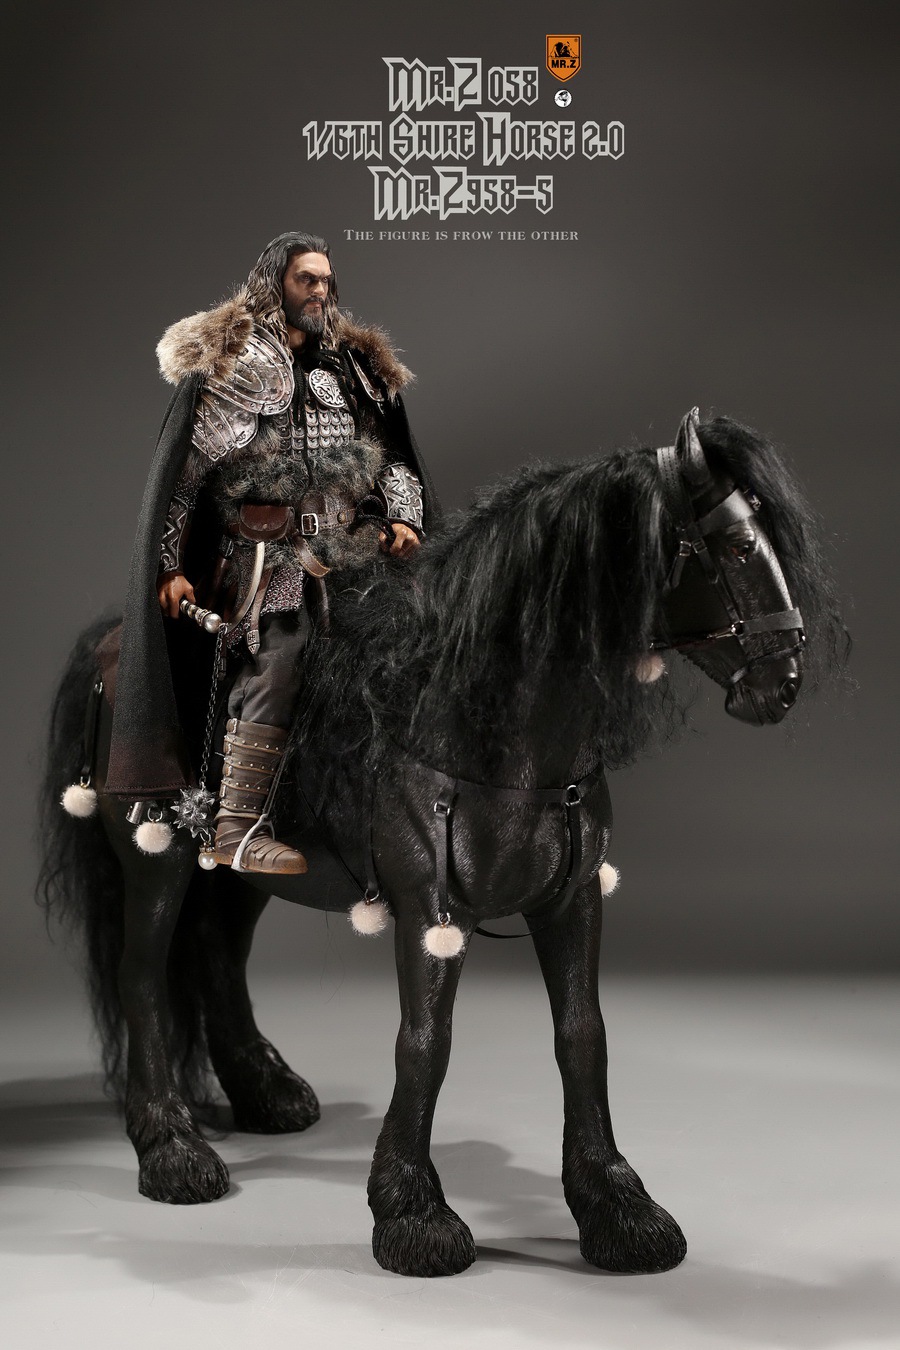 Mr - NEW PRODUCT: MR. Z: 58th round-Shire Horse 2.0 version full set of 5 colors  08580011